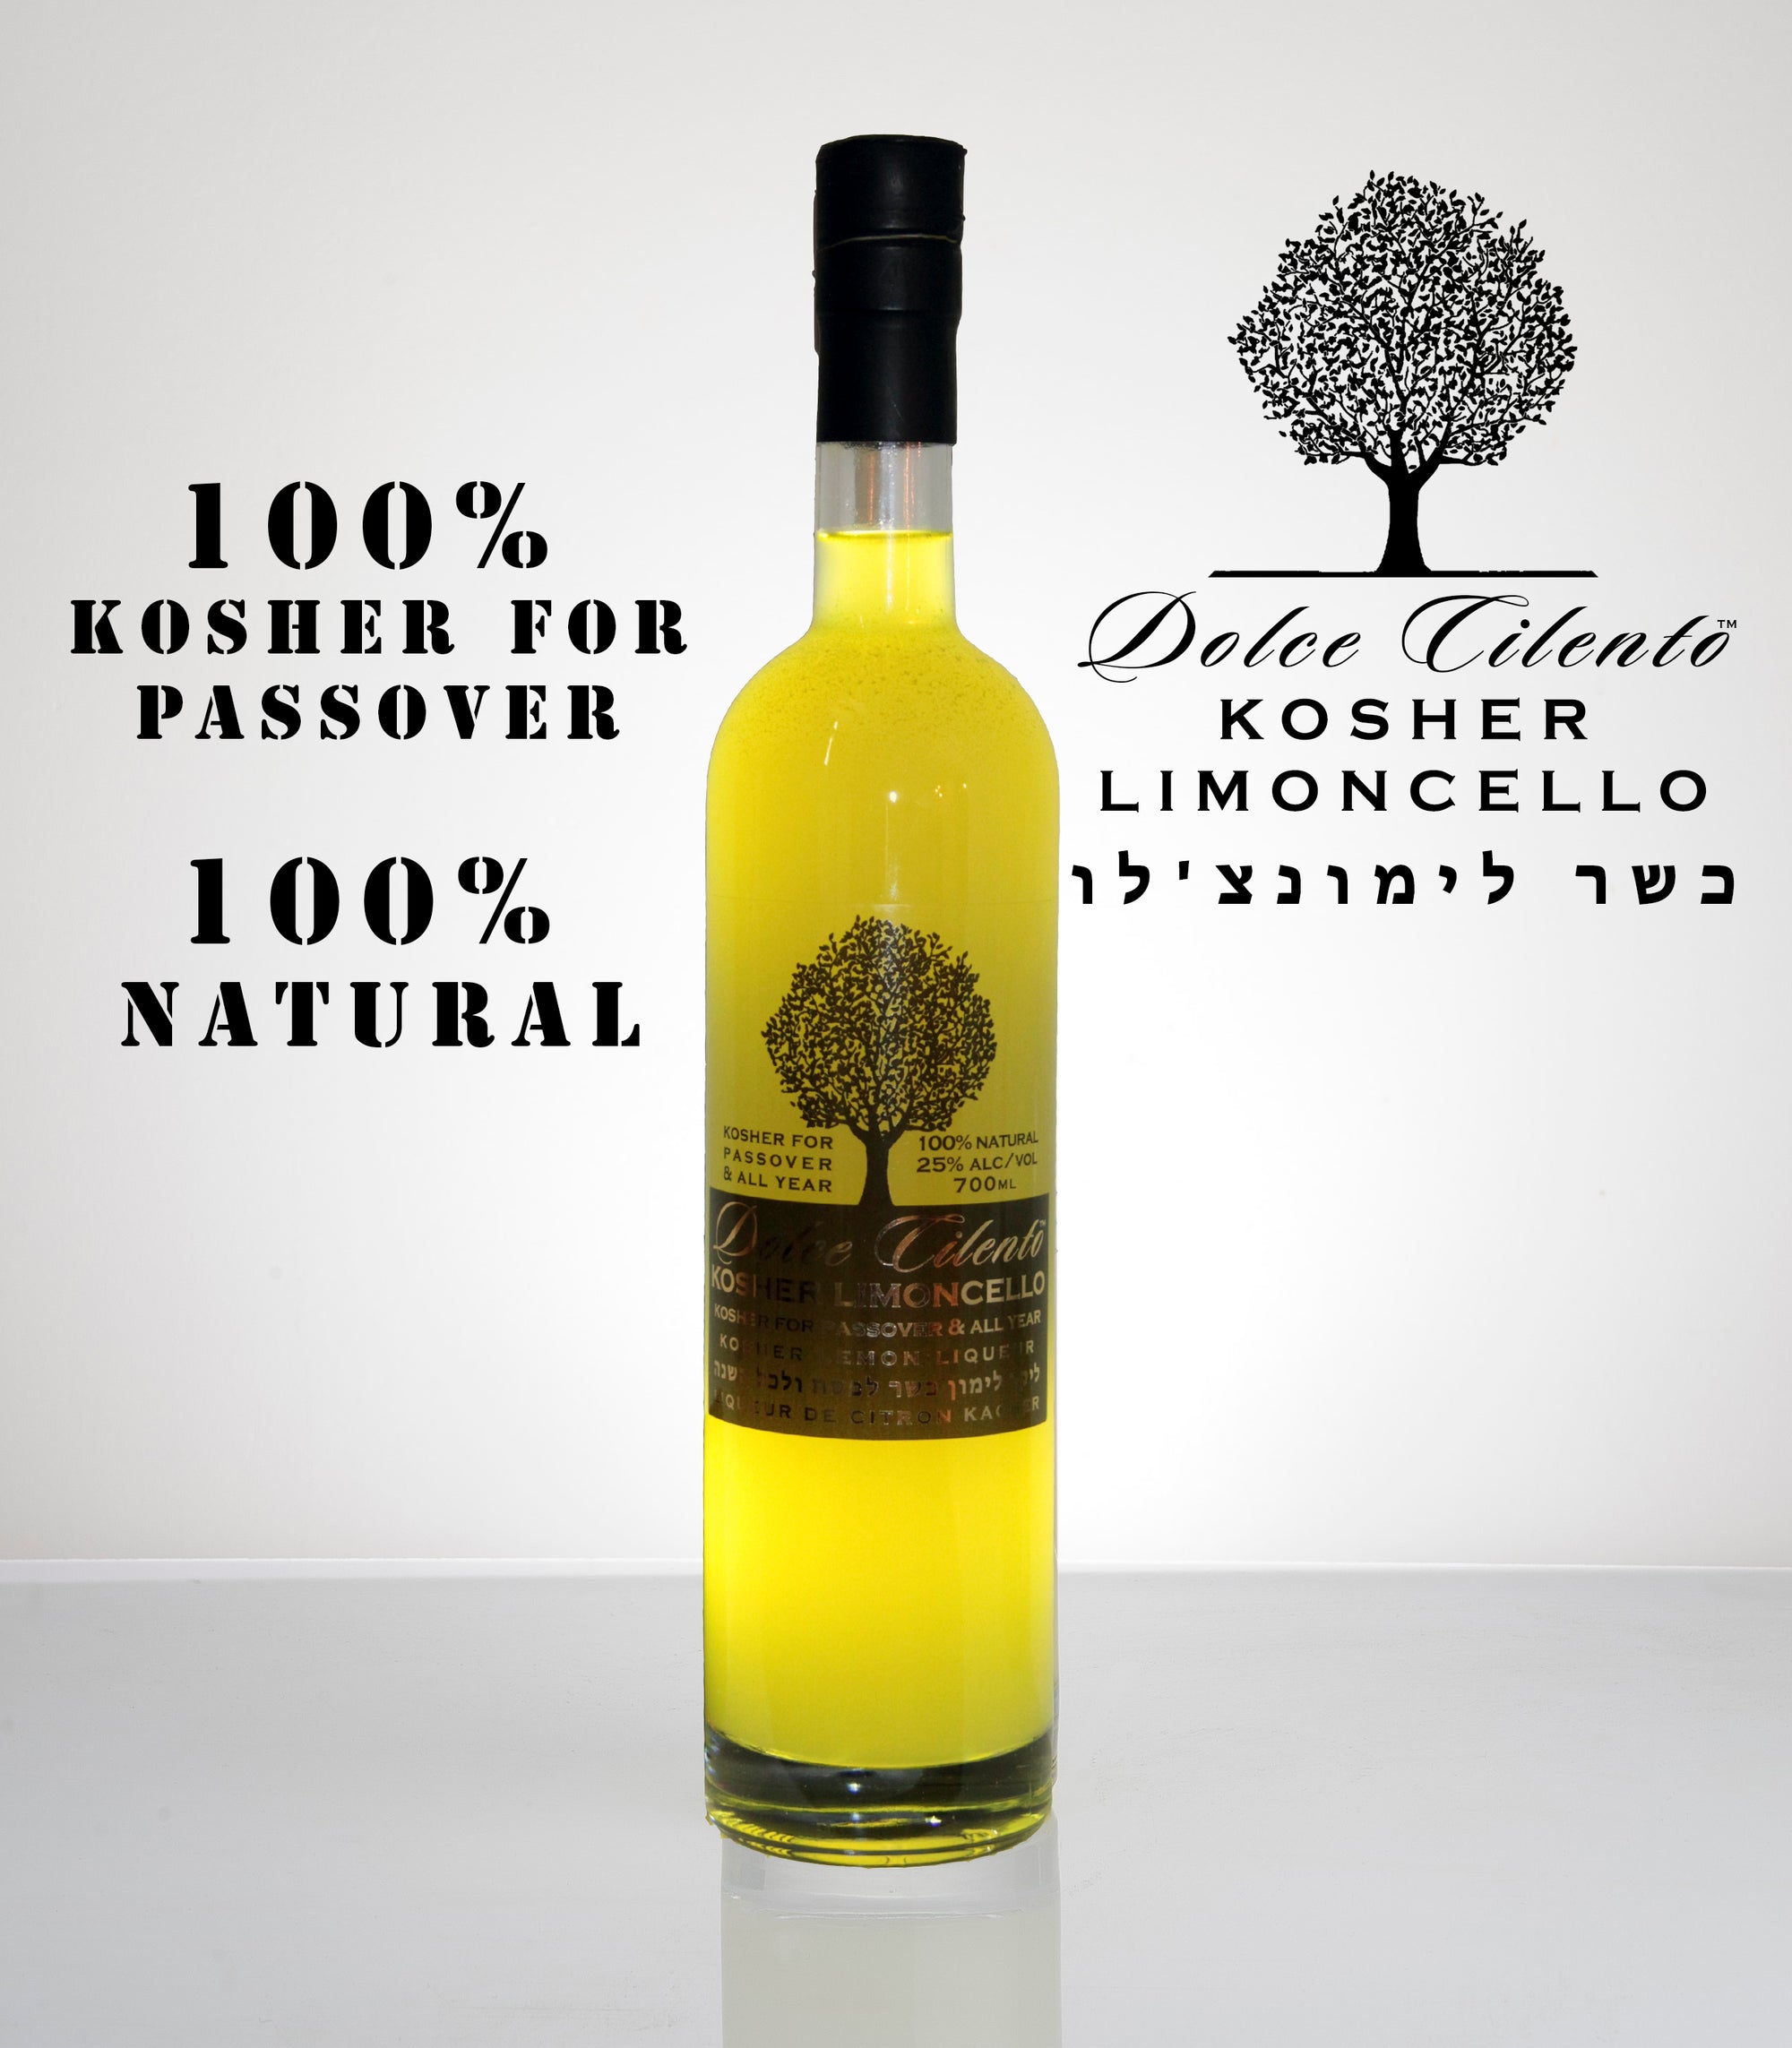 Dolce Cilento Kosher Limoncello, 750ml, 25% Passover & All Year 100% Natural USA Only